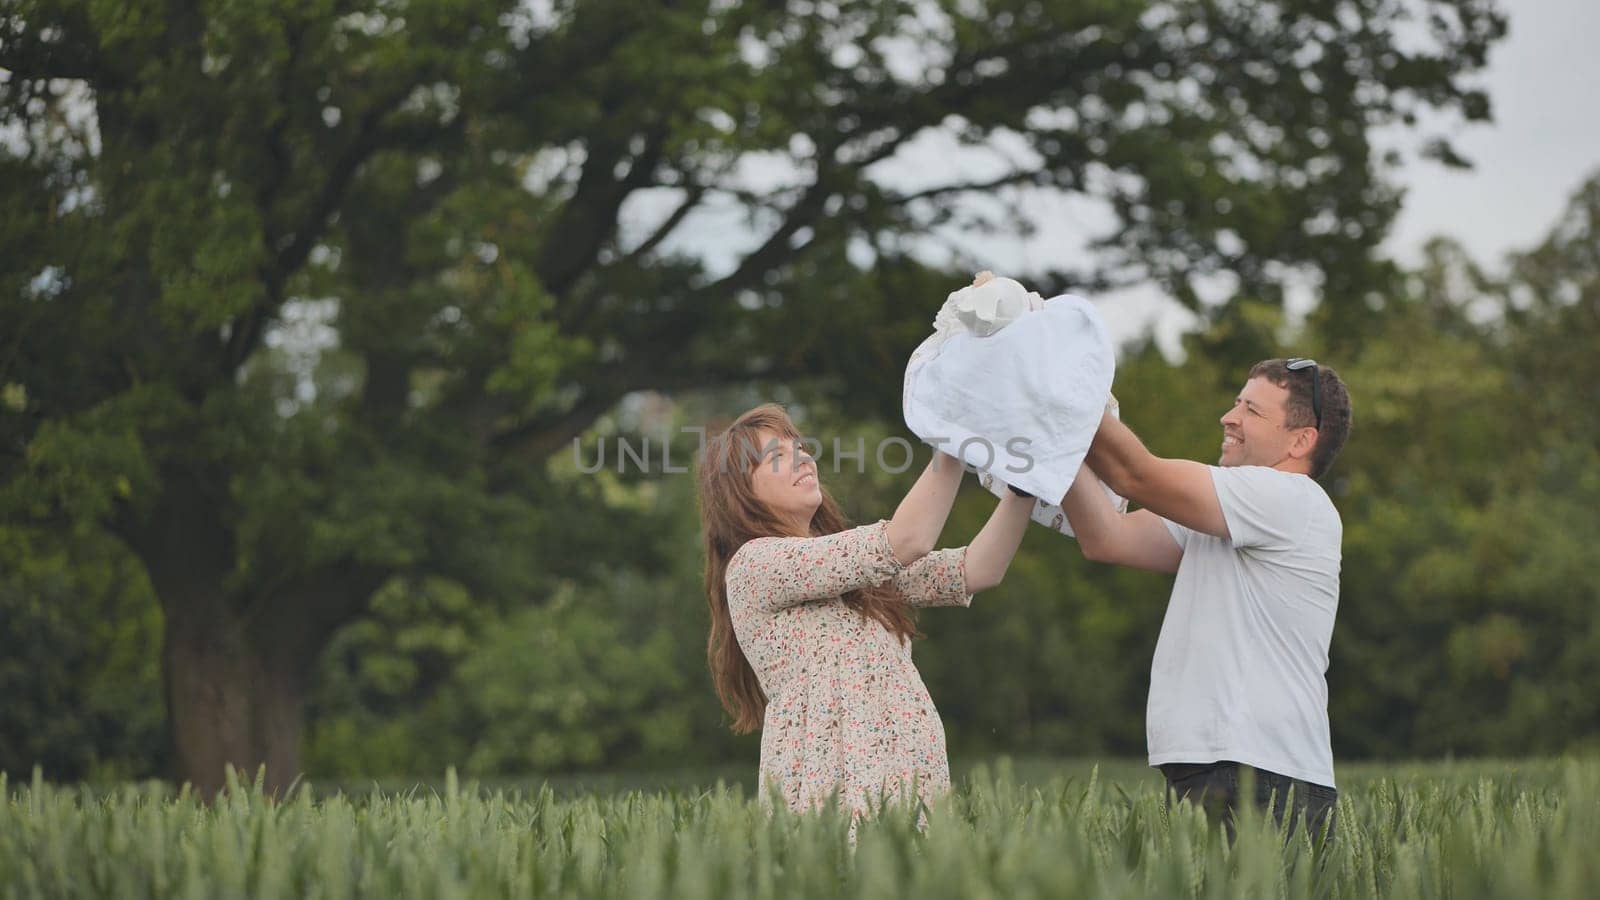 The young couple lifts their newborn baby up and kisses in a field of wheat. by DovidPro